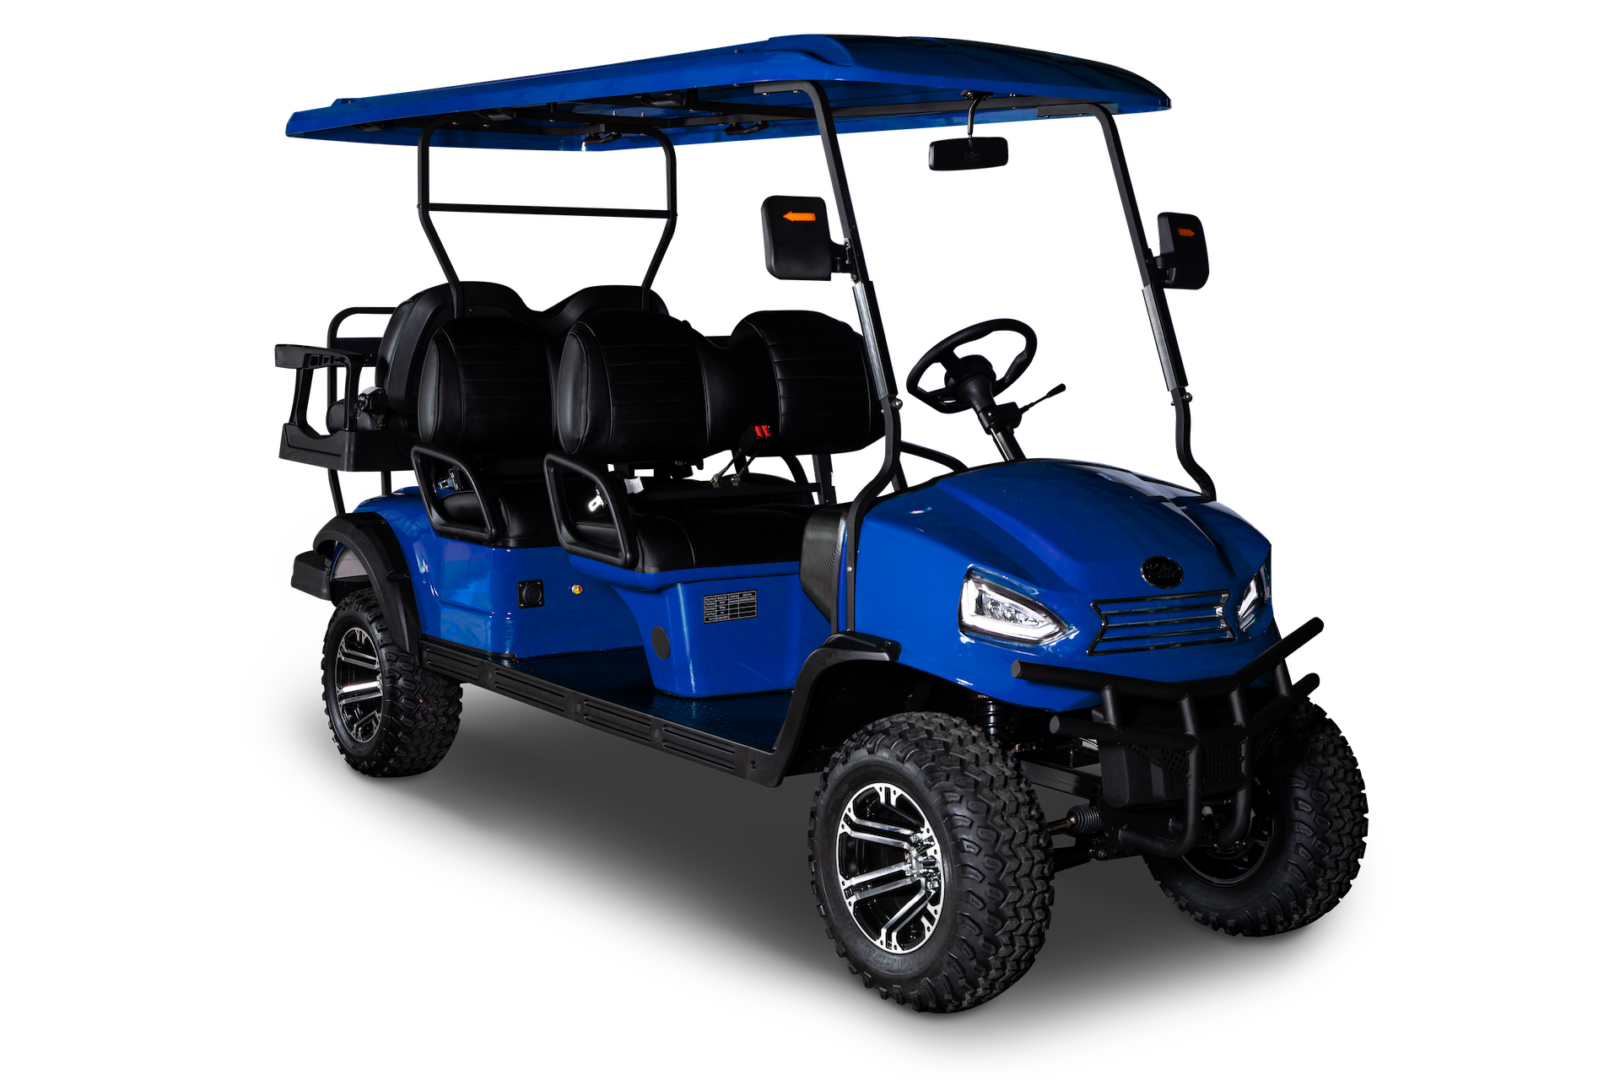 A blue golf cart is shown on the ground.